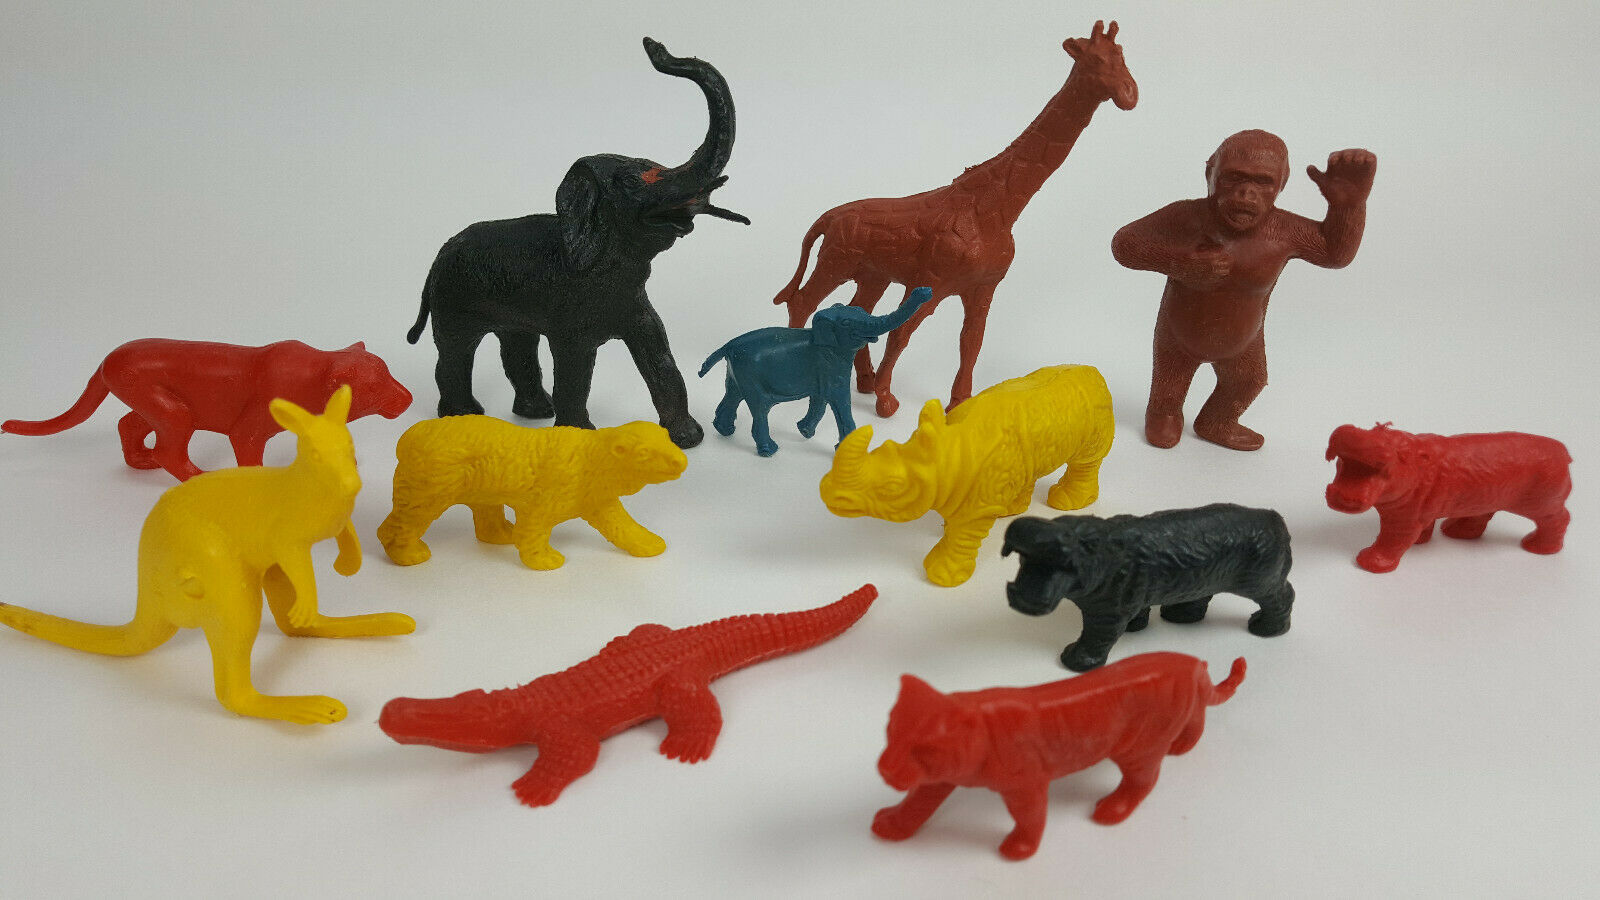 molded plastic playsets 1960s